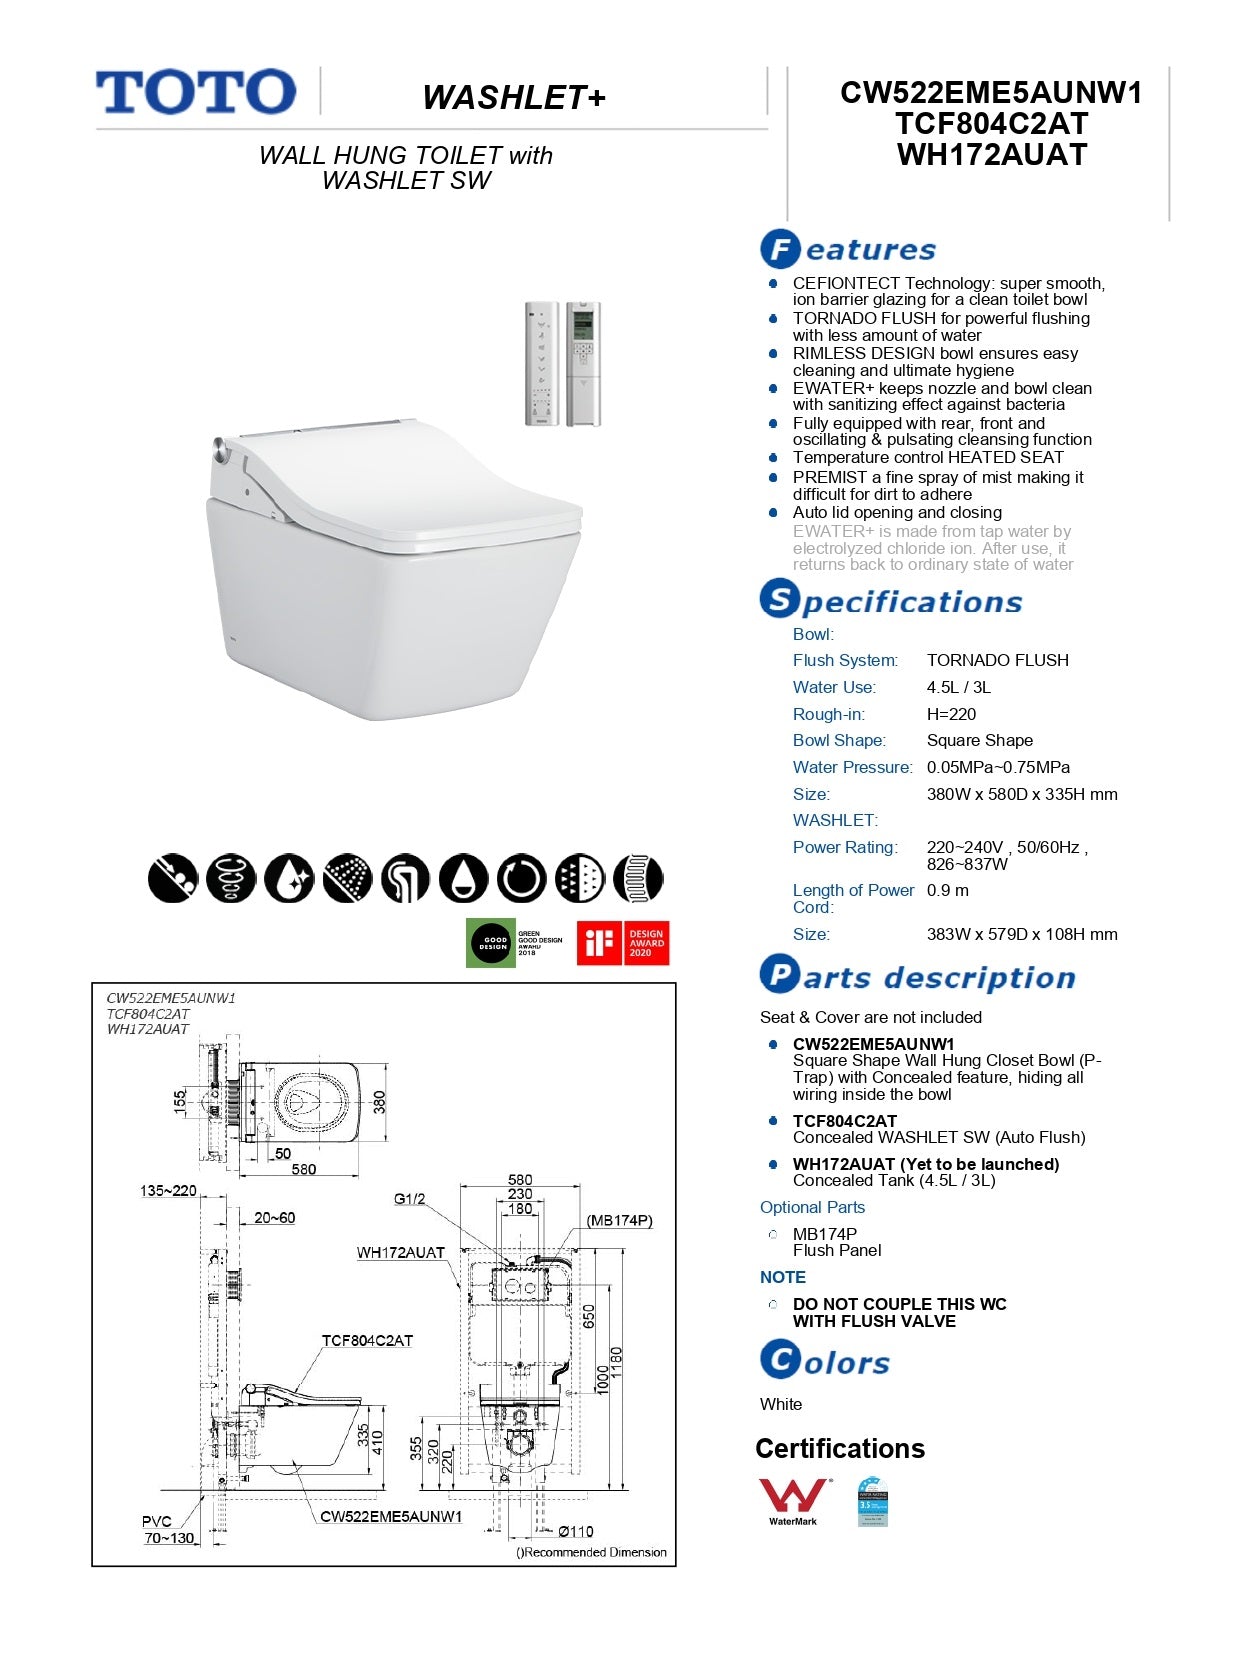 TOTO SW WALL HUNG TOILET WITH WASHLET PACKAGE W/ AUTOLID AND AUTOFLUSH GLOSS WHITE